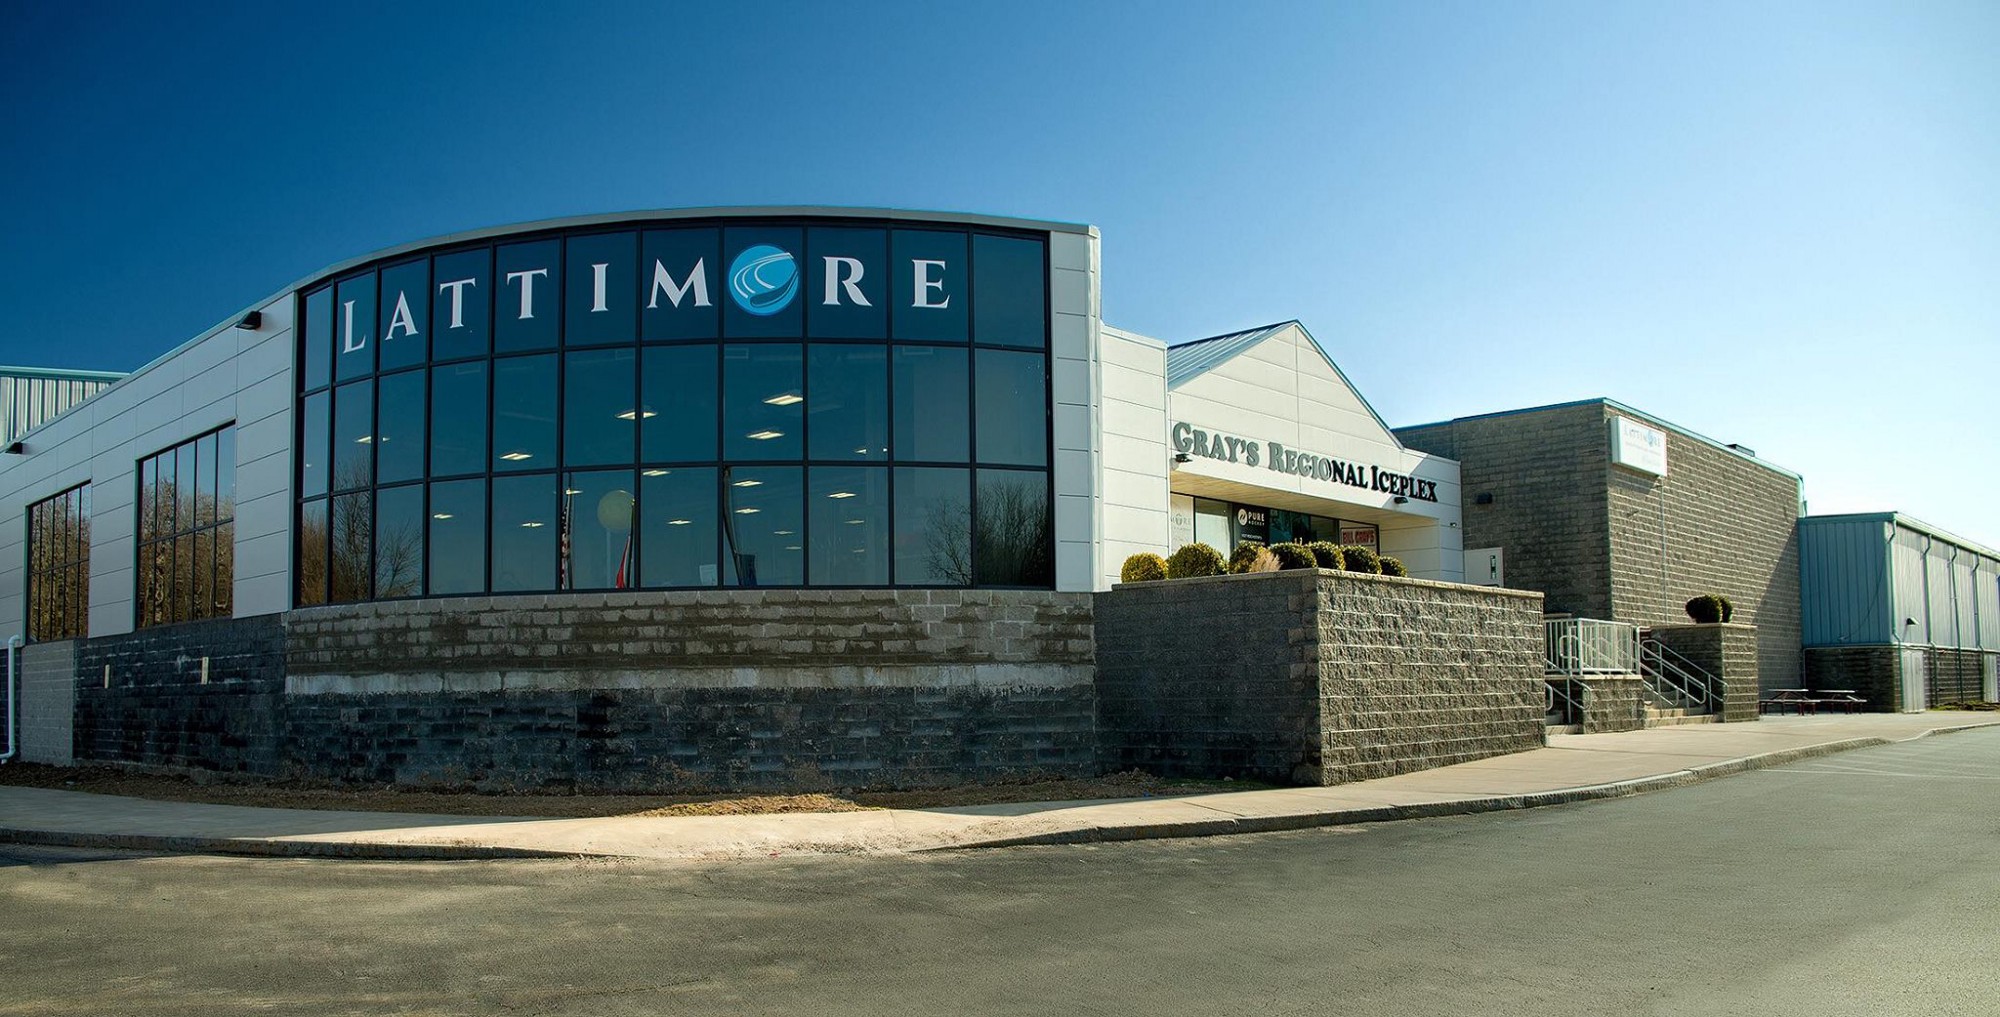 Lattimore PT at the Bill Gray’s Iceplex and Lattimore PT North Chili have turned 1 year old!